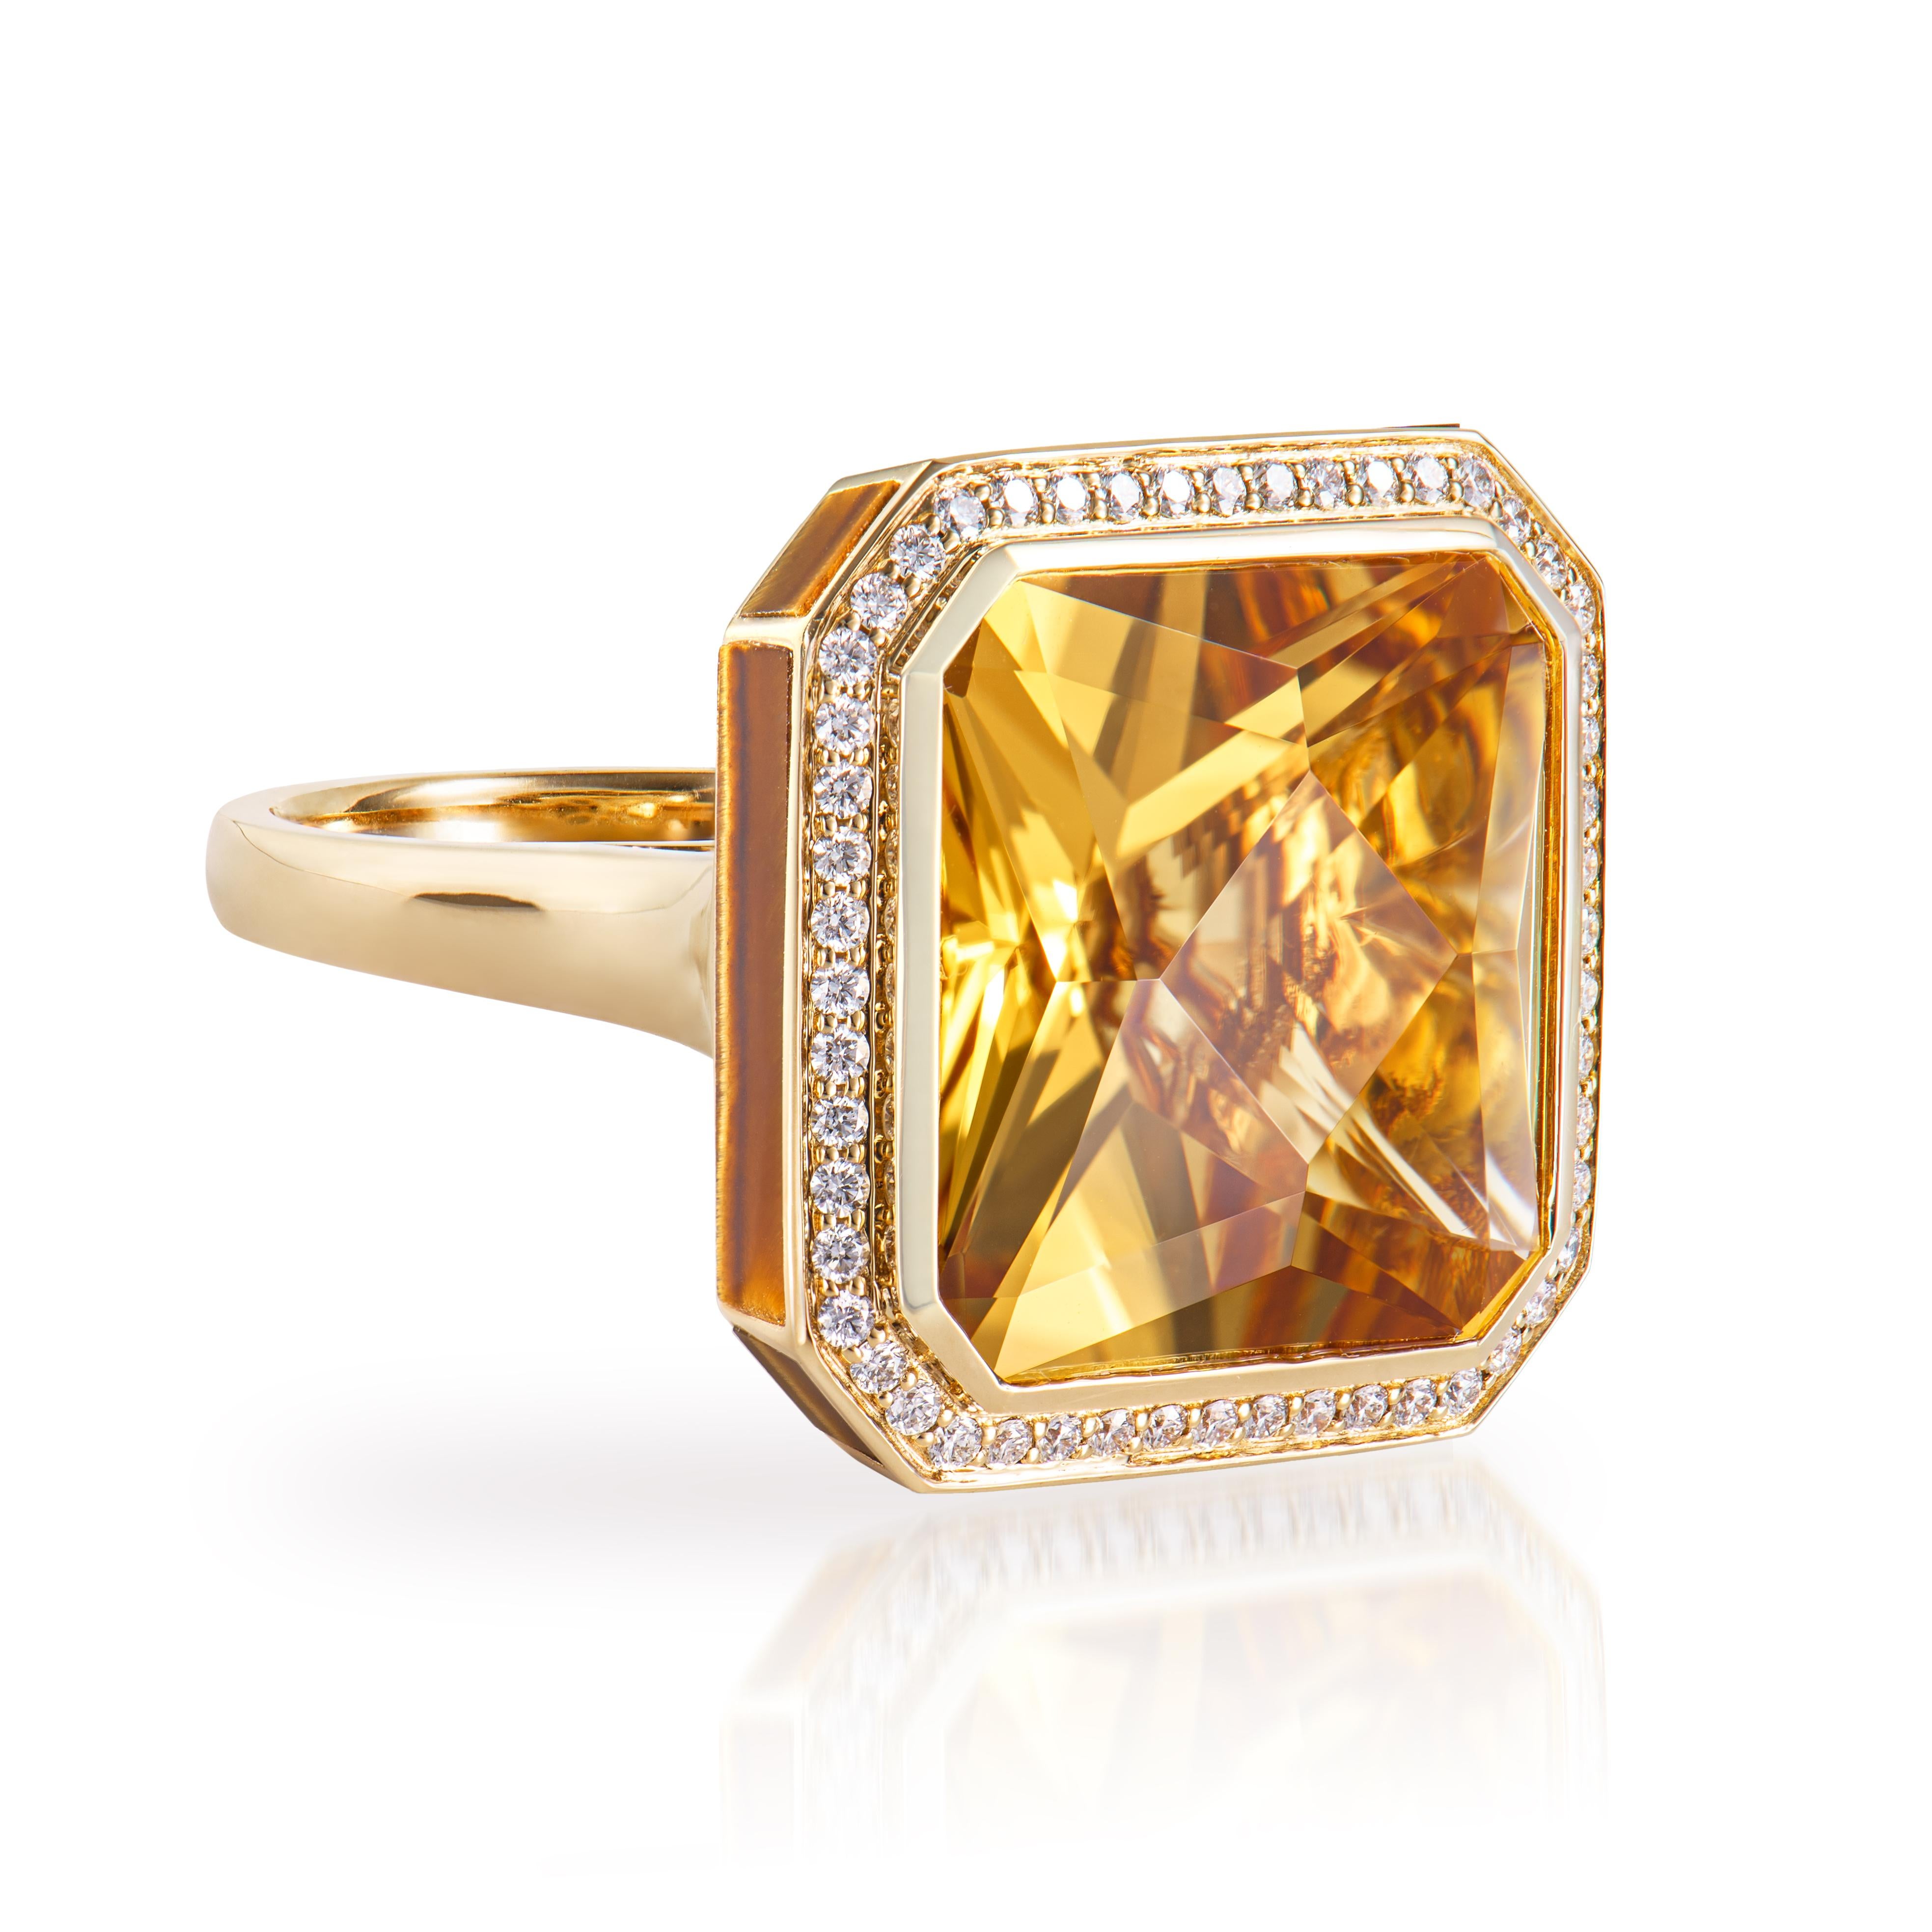 This lovely honey quartz ring is set in an octagon shape. The tiger eye that embraces the ring's border adds to its beauty and elegance. This trendy ring is suitable for any event or gathering. These gemstones with diamonds are set in yellow gold